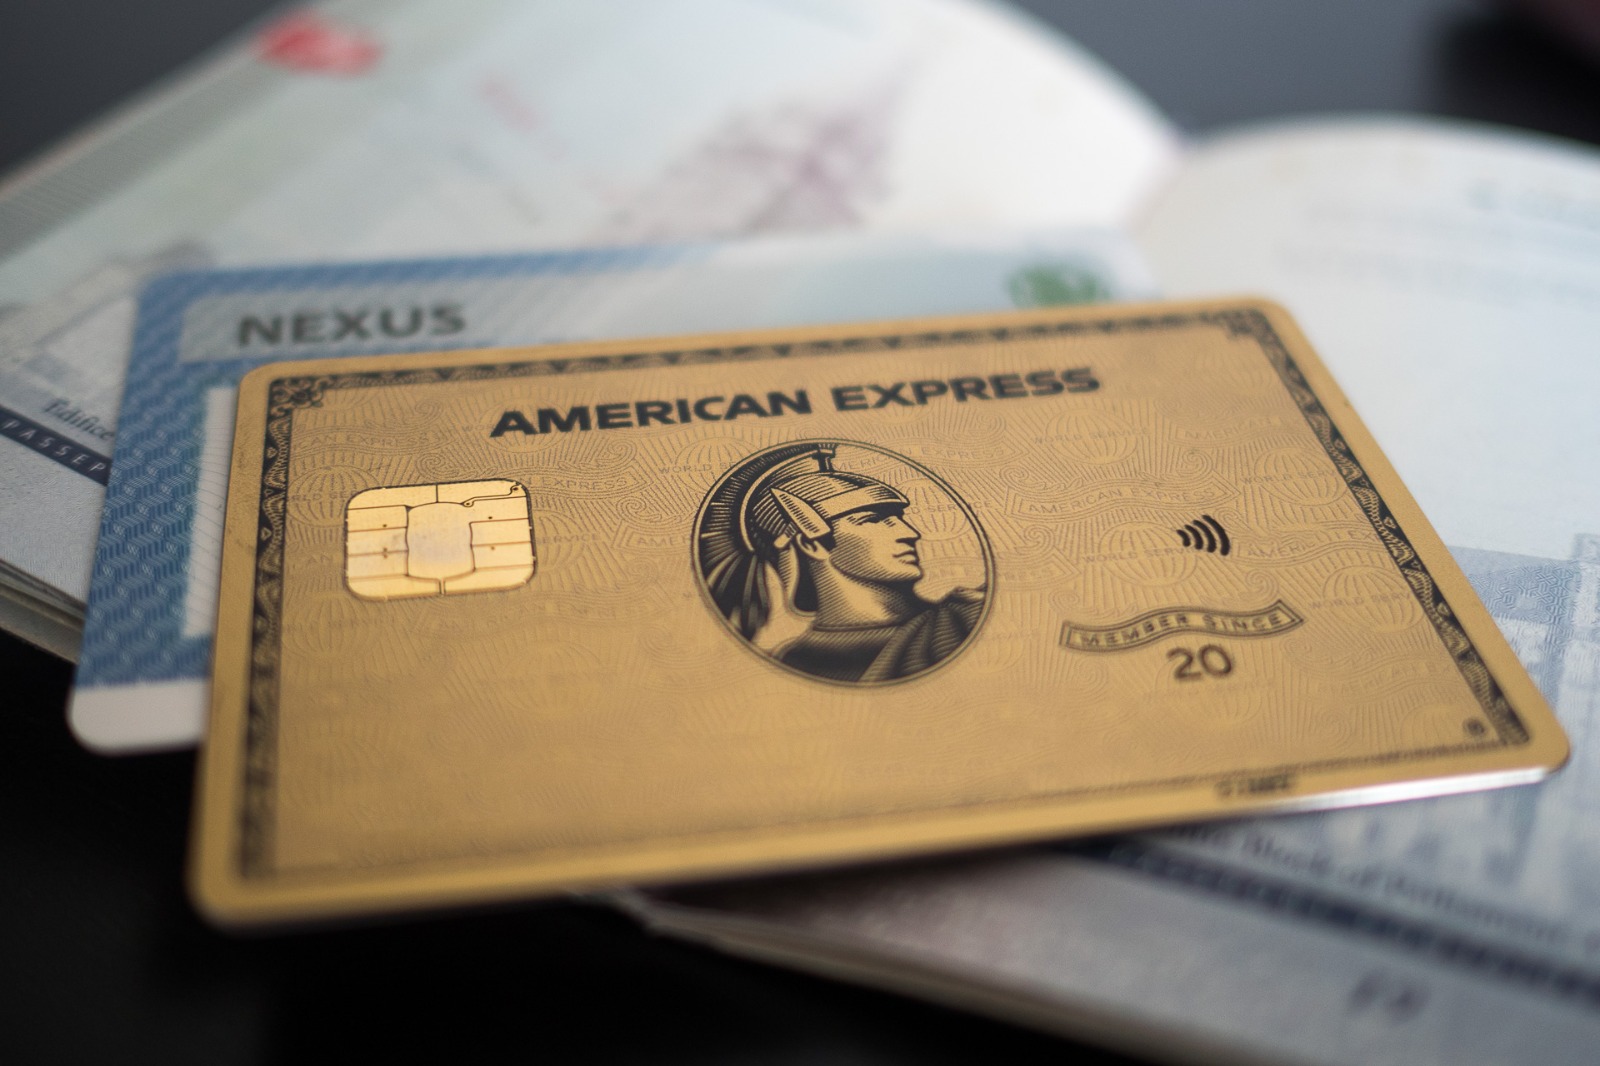 Amex Gold Rewards Card: New Offer of 75,000 MR Points! | Prince of Travel